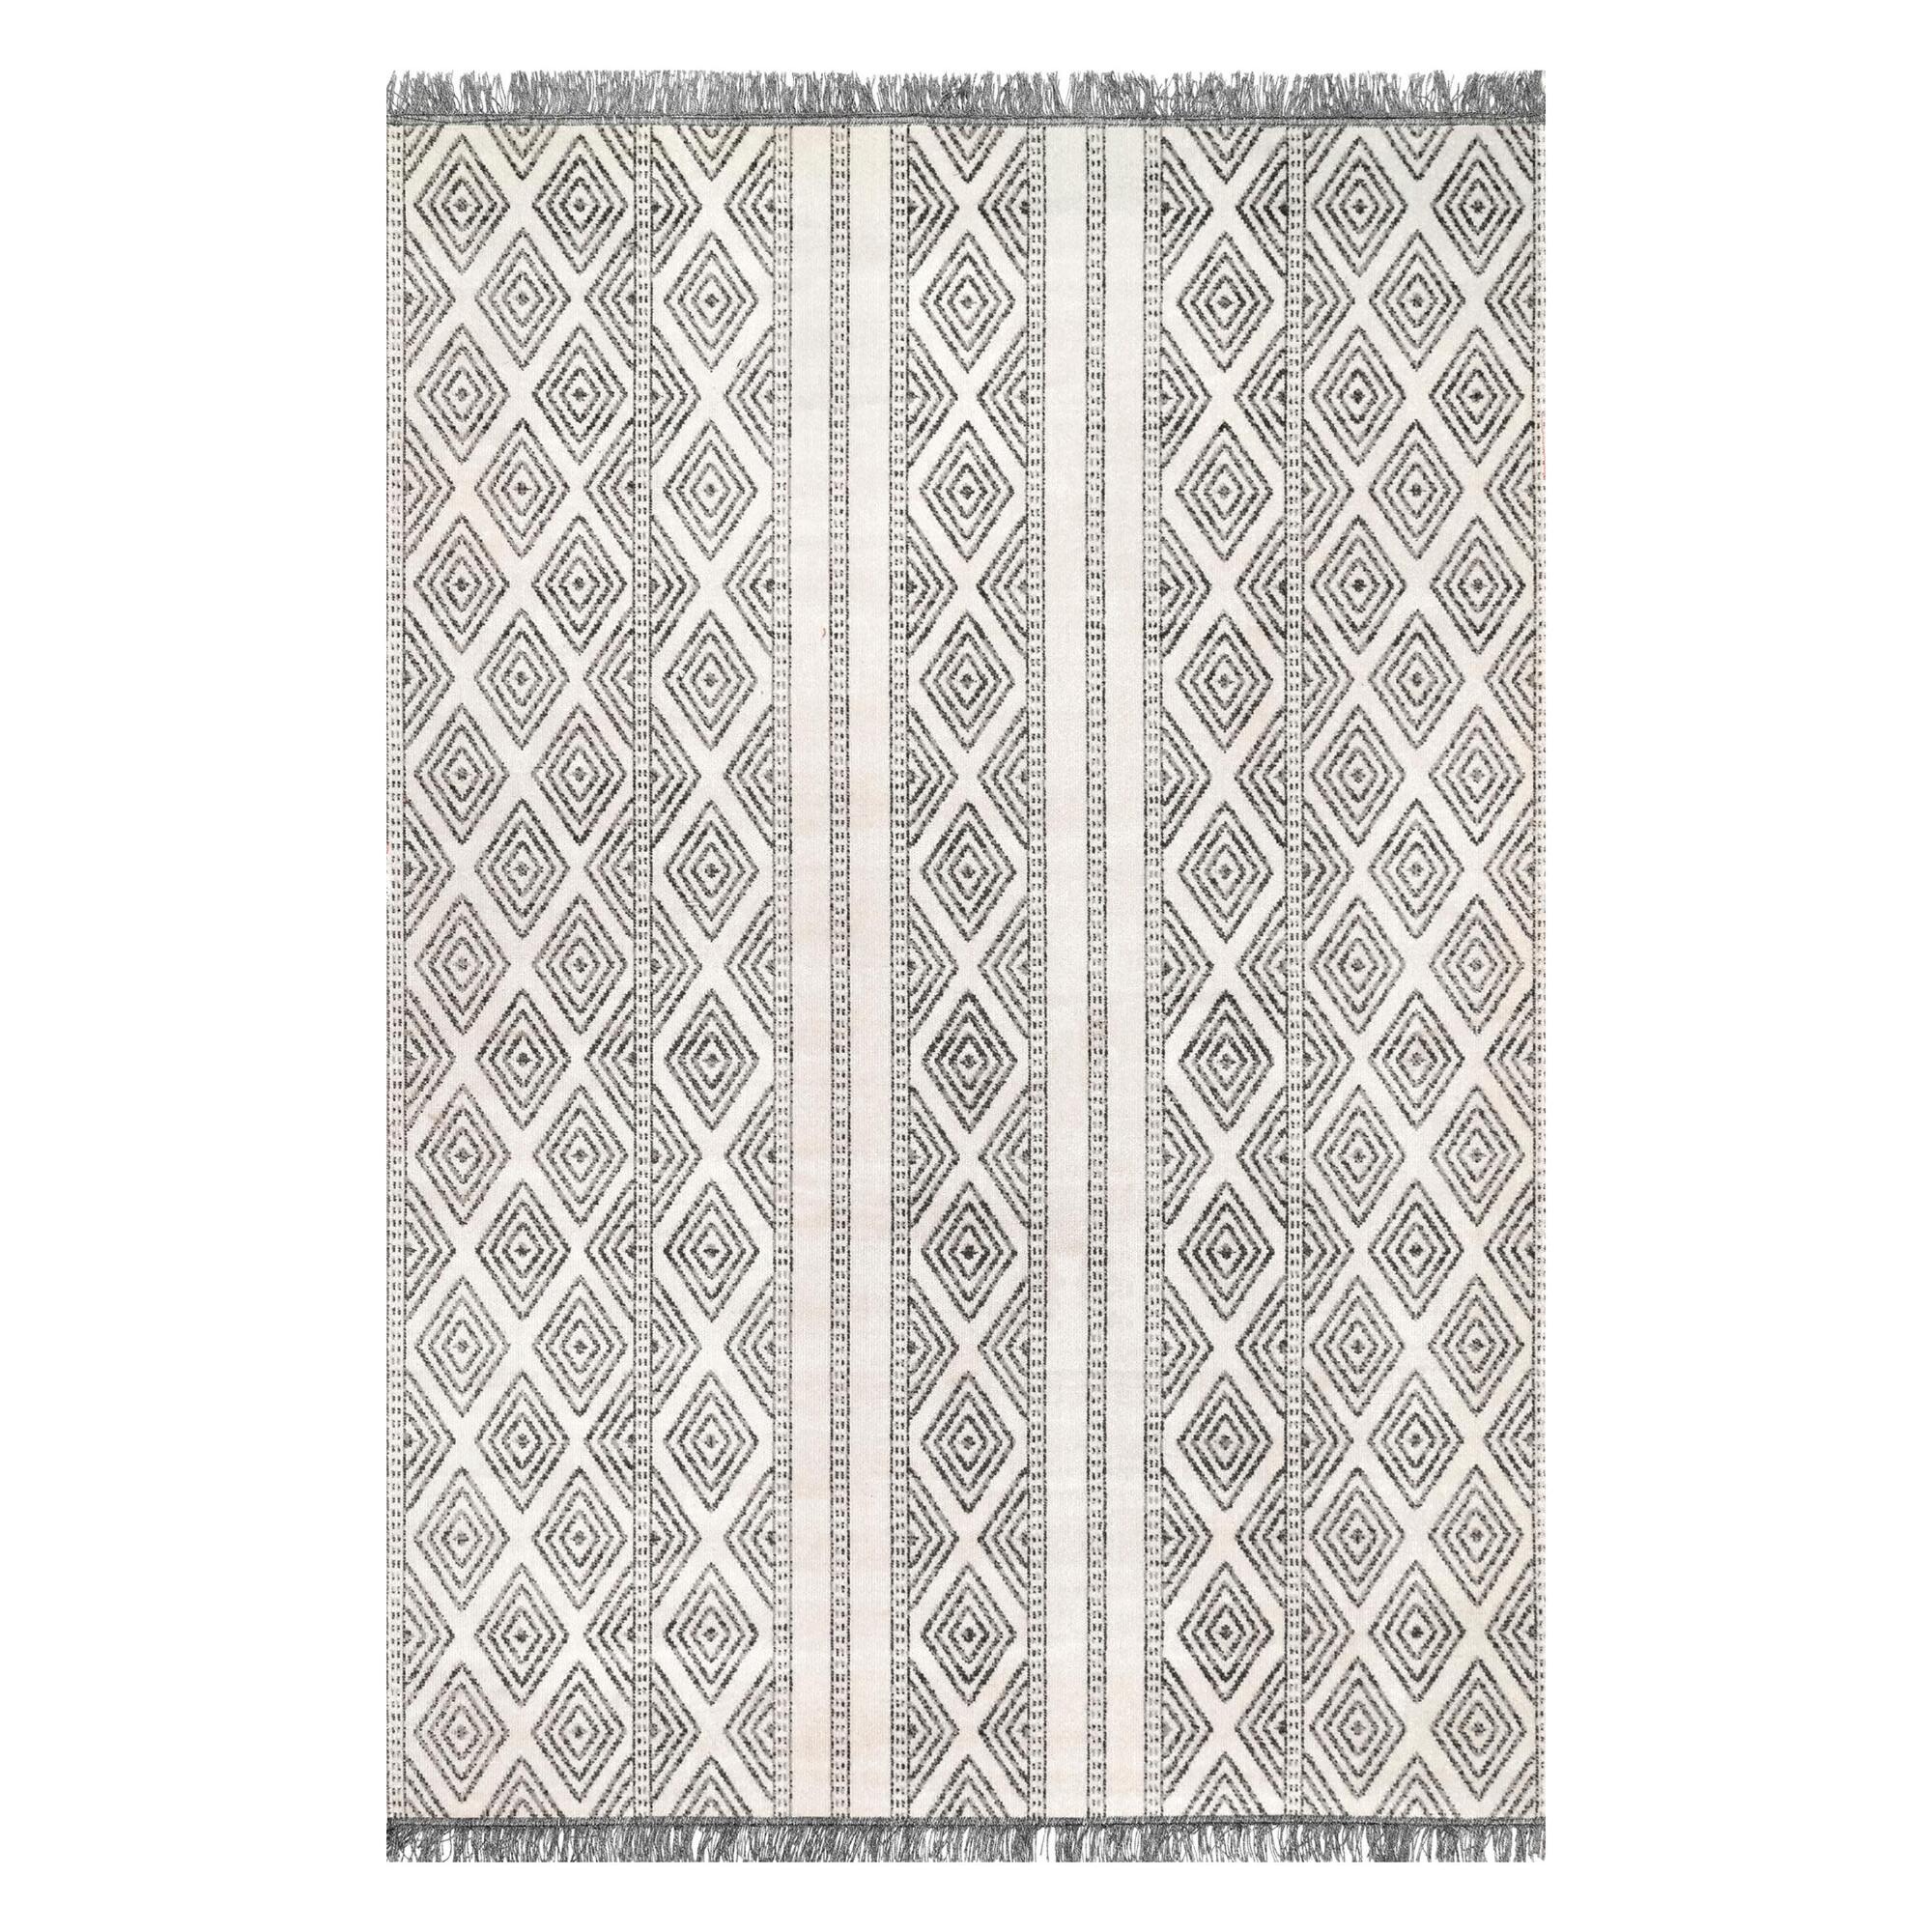 Gray And Ivory Lattice Stripe Cairo Indoor Outdoor Patio Rug: Gray/Natural - Synthetic Fibers - 6' x 9' by World Market